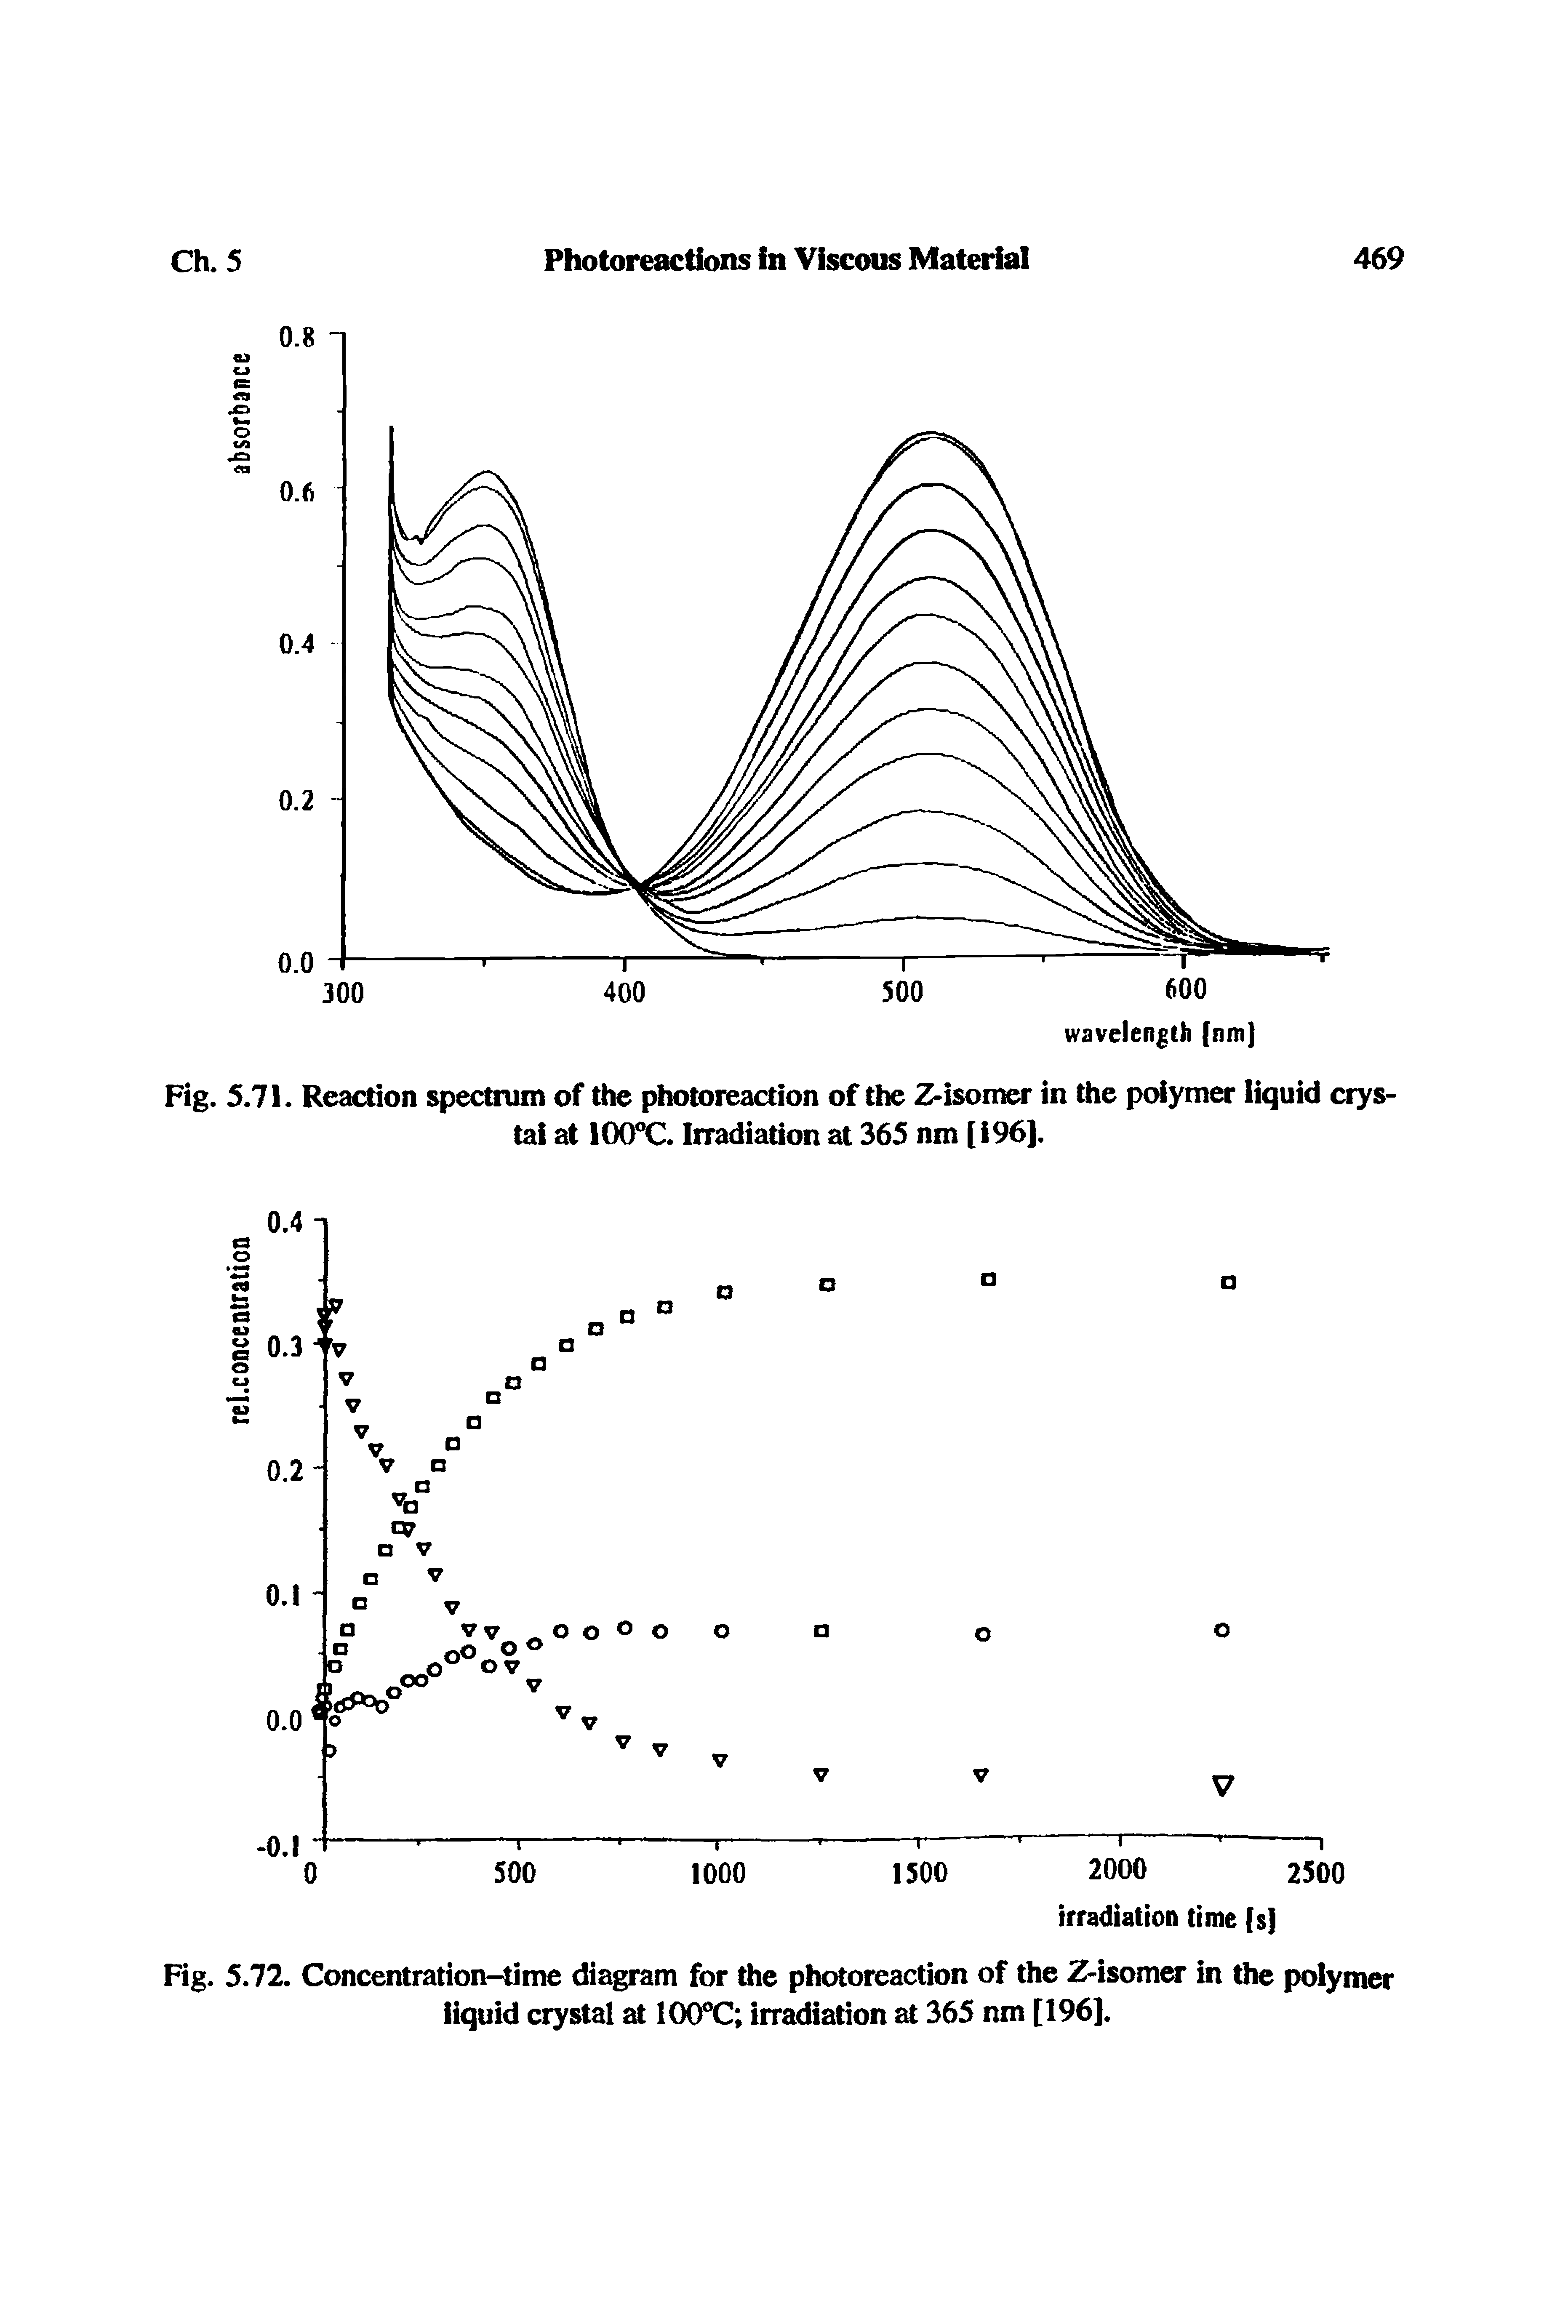 Fig. 5.72. Concentration-time diagram for the photoreaction of the Z-isomcr in the polymer...